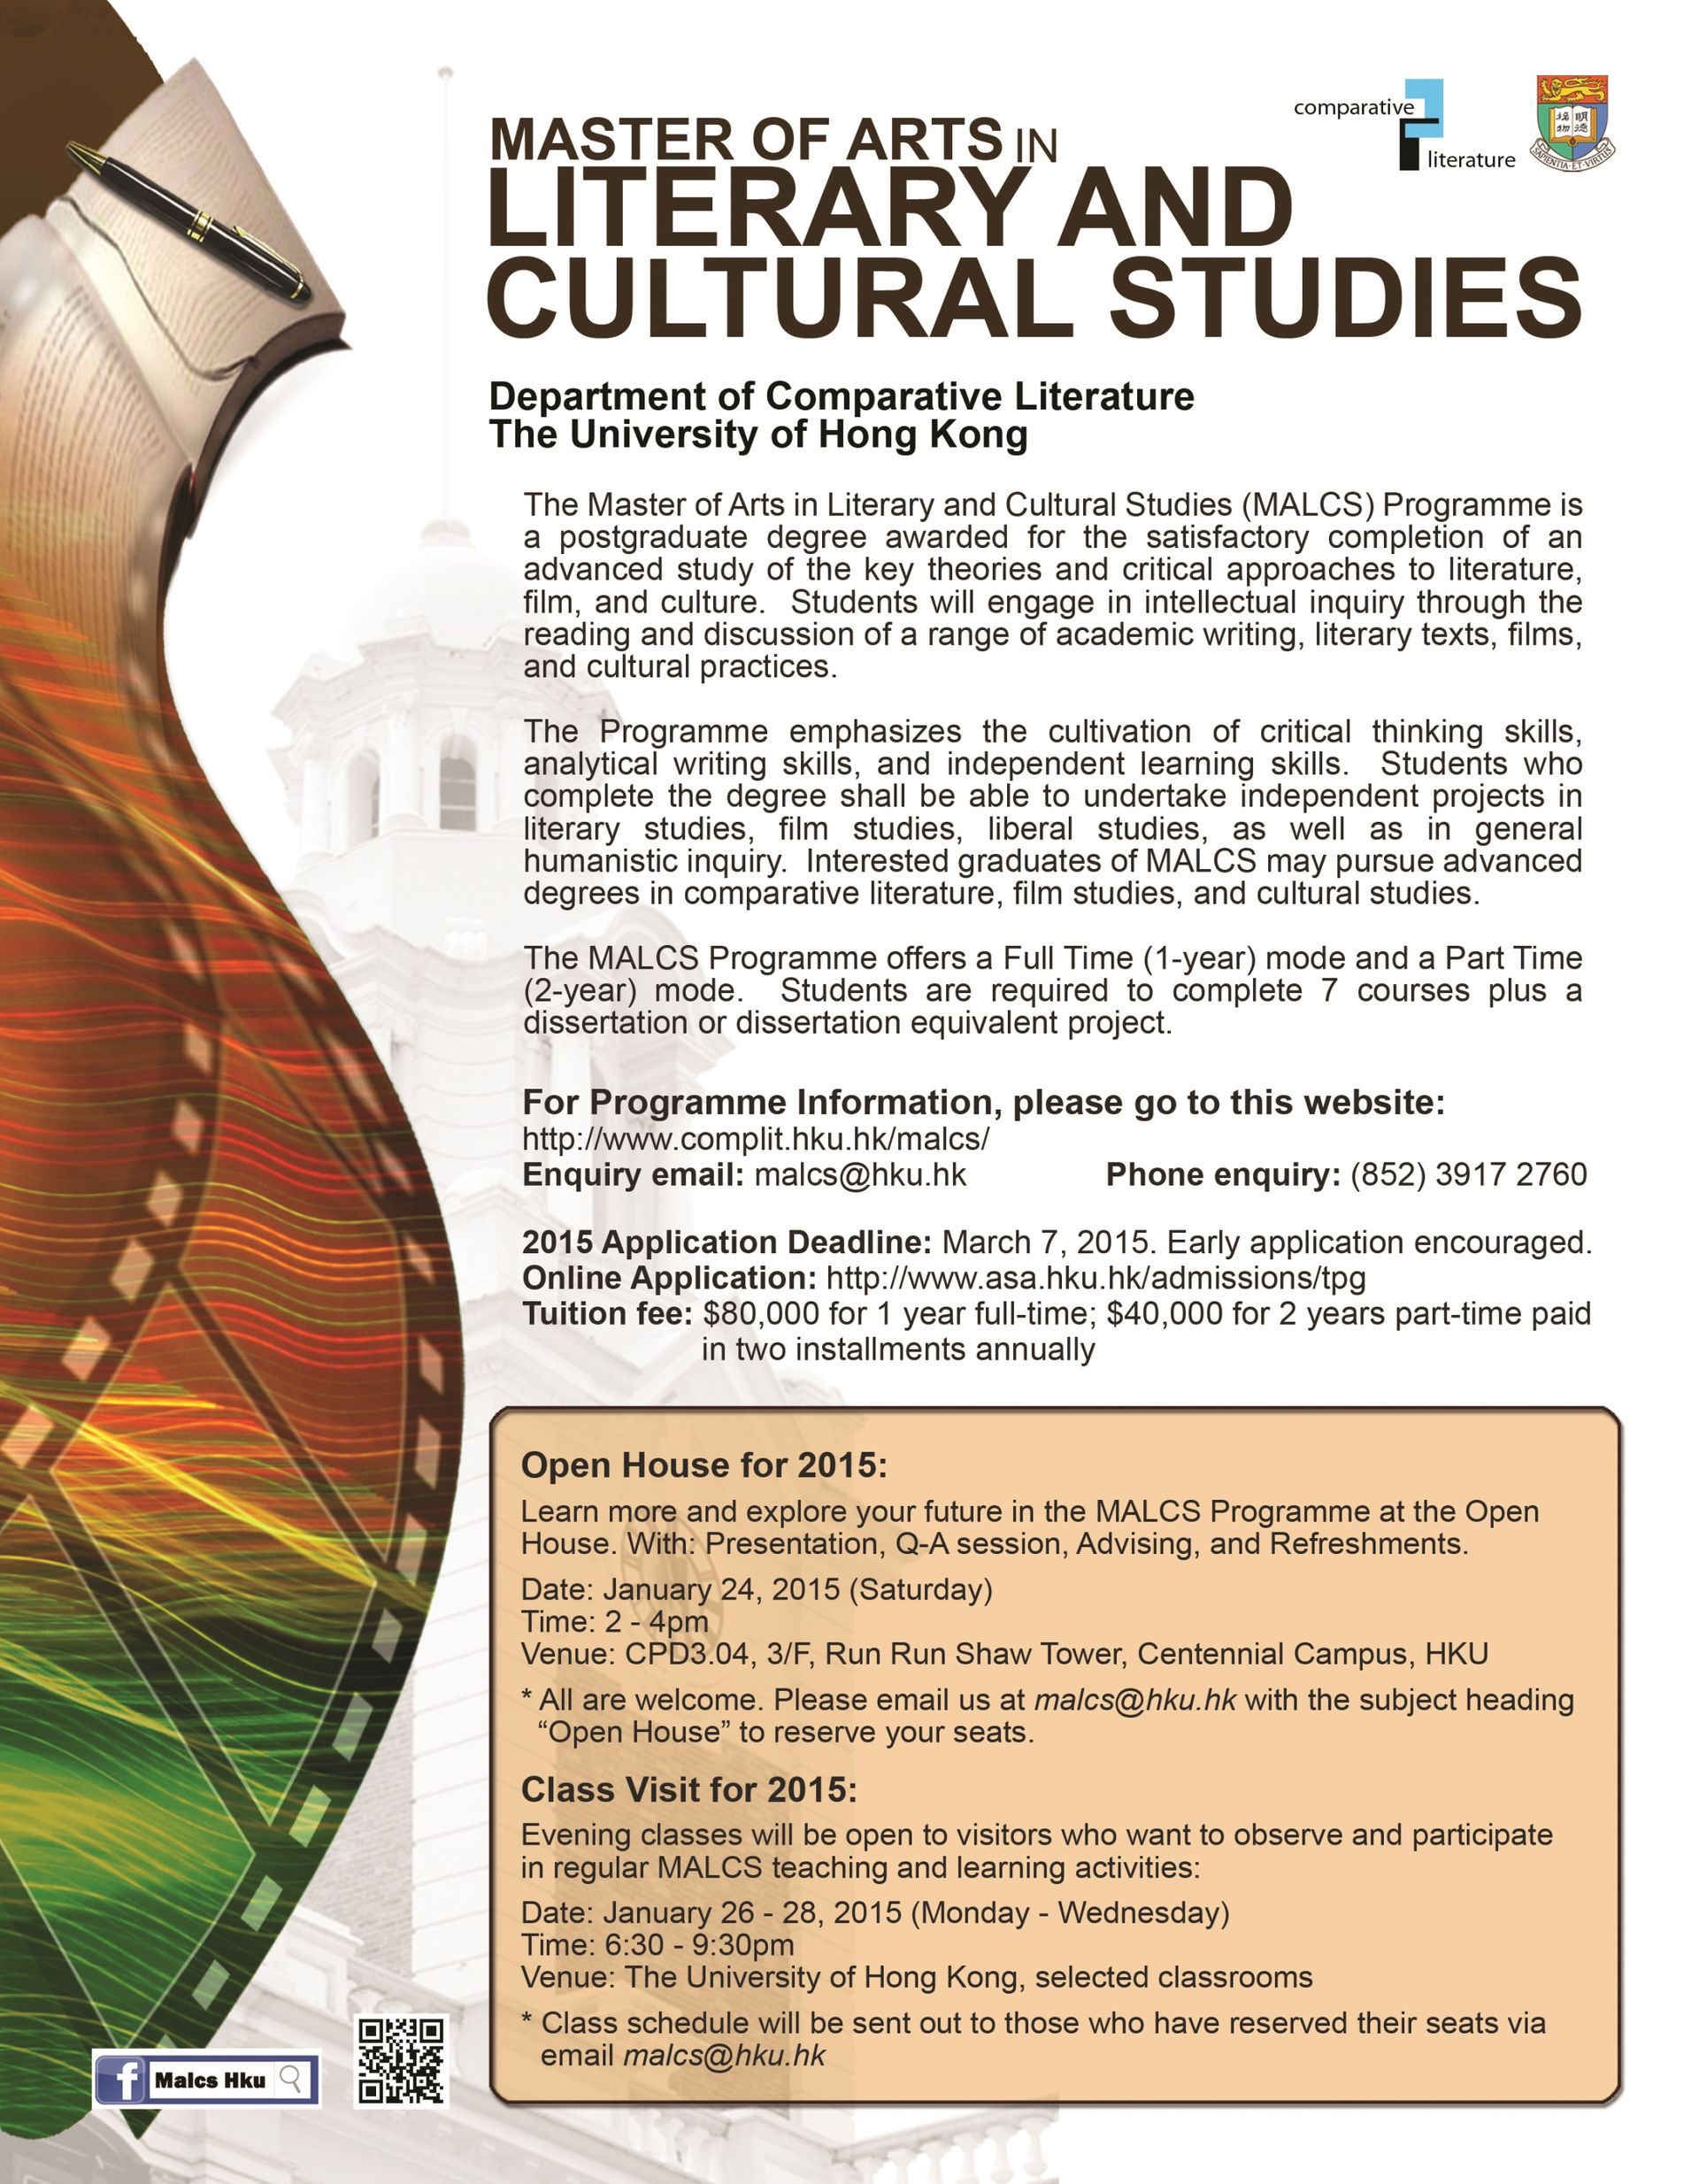 Master of Arts in Literary and Cultural Studies (MALCS) offered by the Department of Comparative Literature, HKU